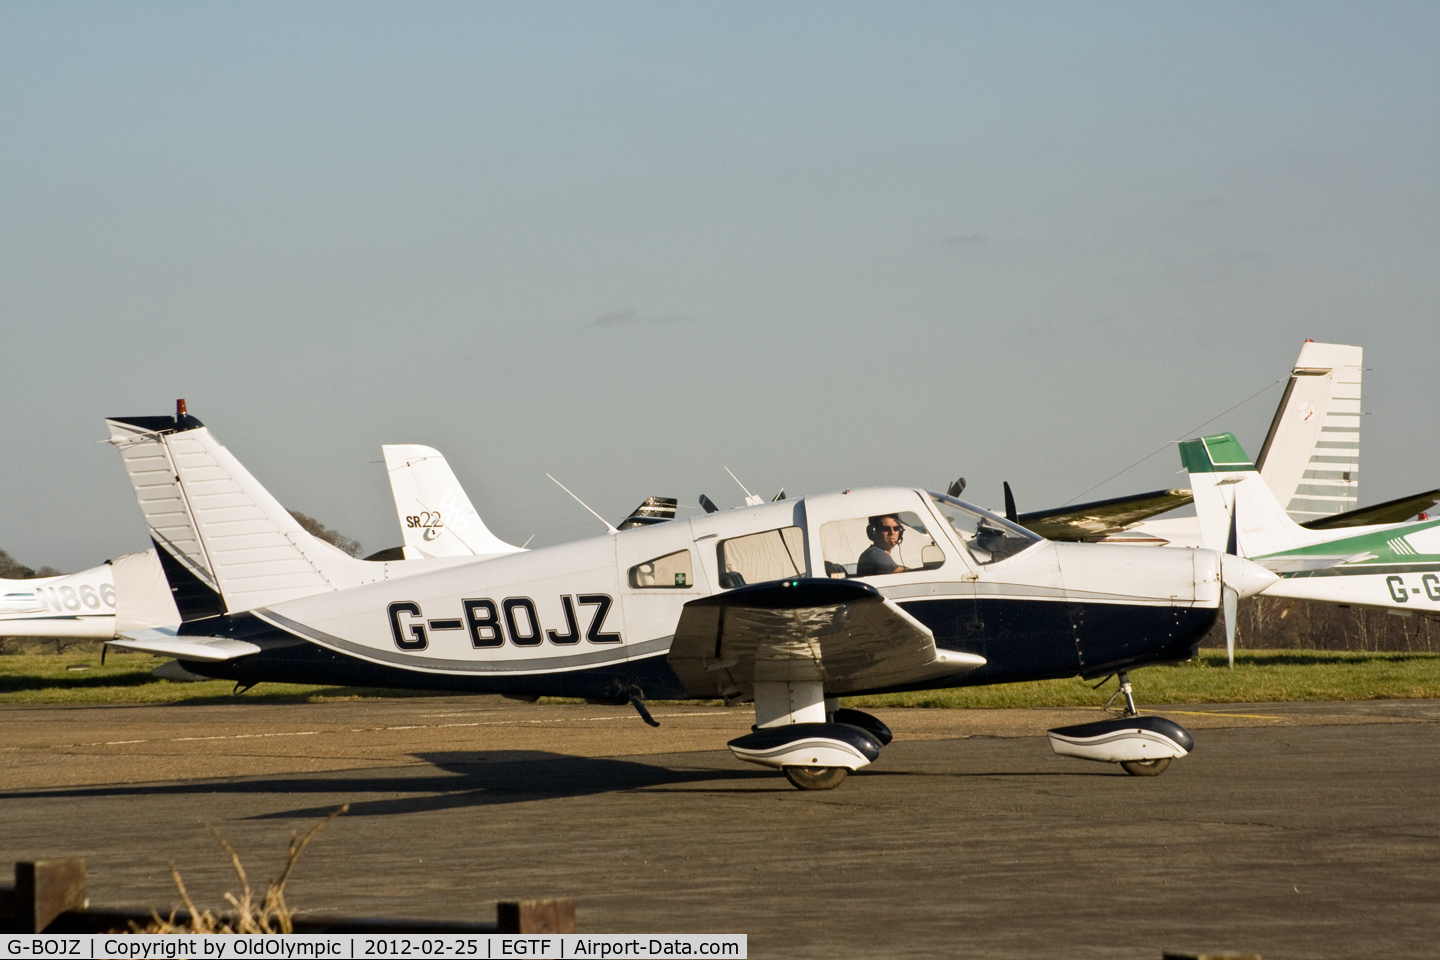 G-BOJZ, 1979 Piper PA-28-161 Cherokee Warrior II C/N 28-7916223, Company logo removed after Cabair's demise